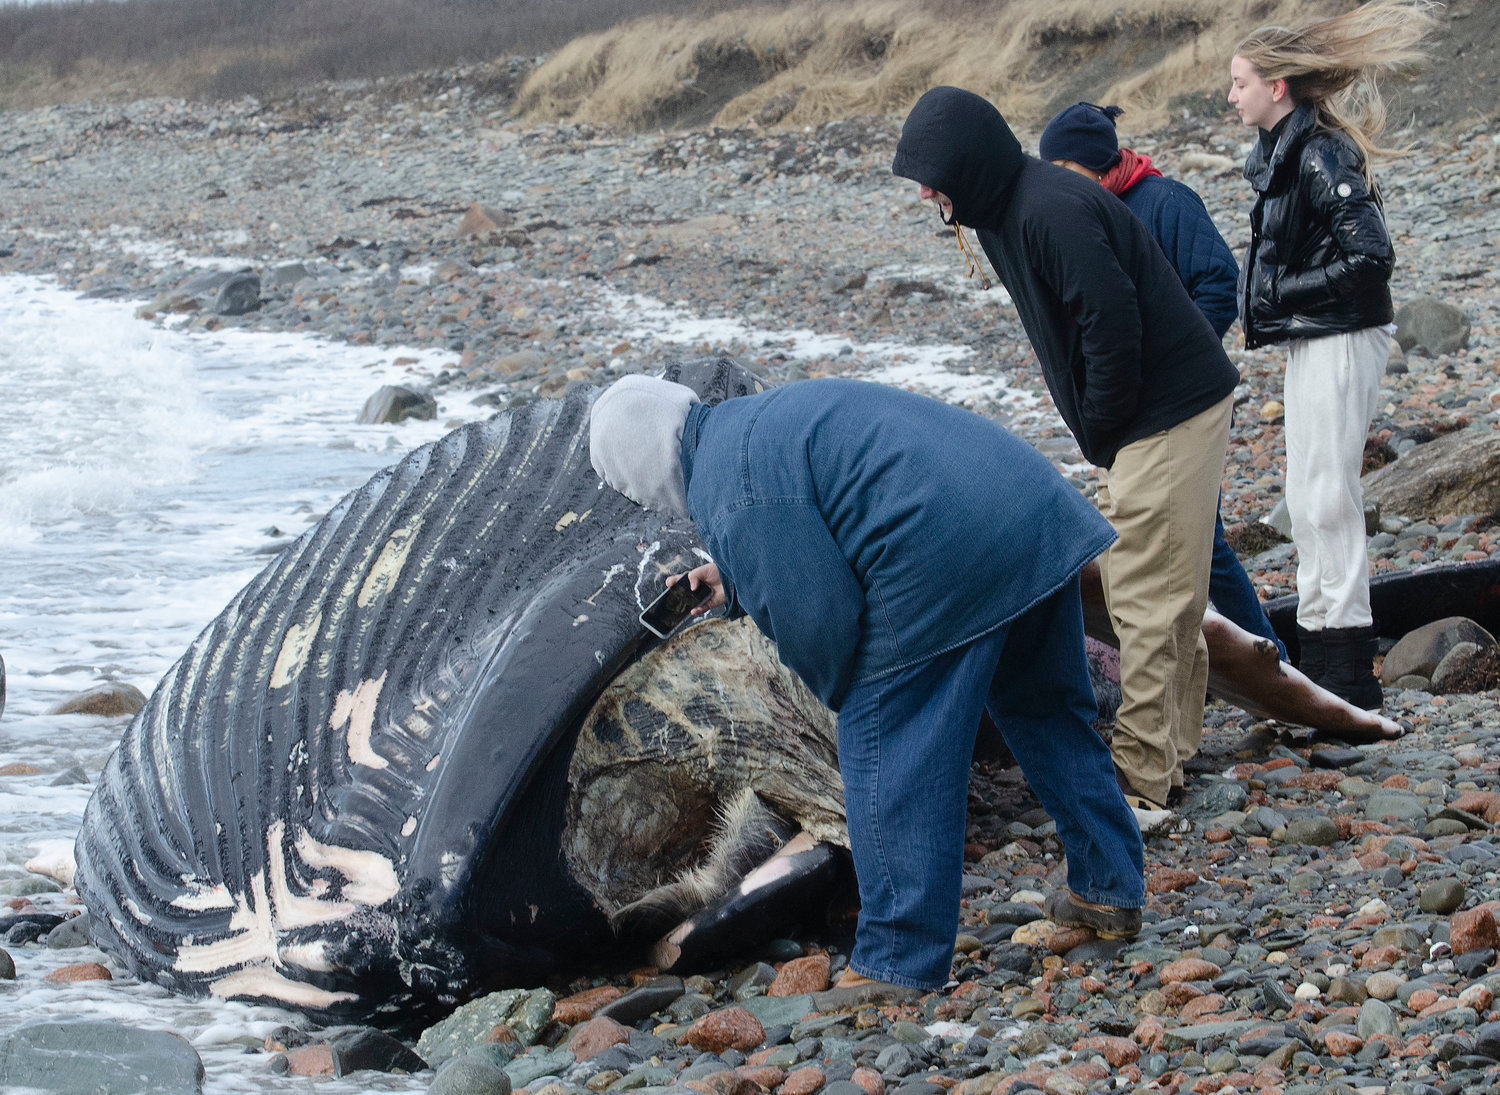 Elizabeth Bowen (left), Aurora Scott, (right) and others check out the deceased humpback whale on Wednesday.